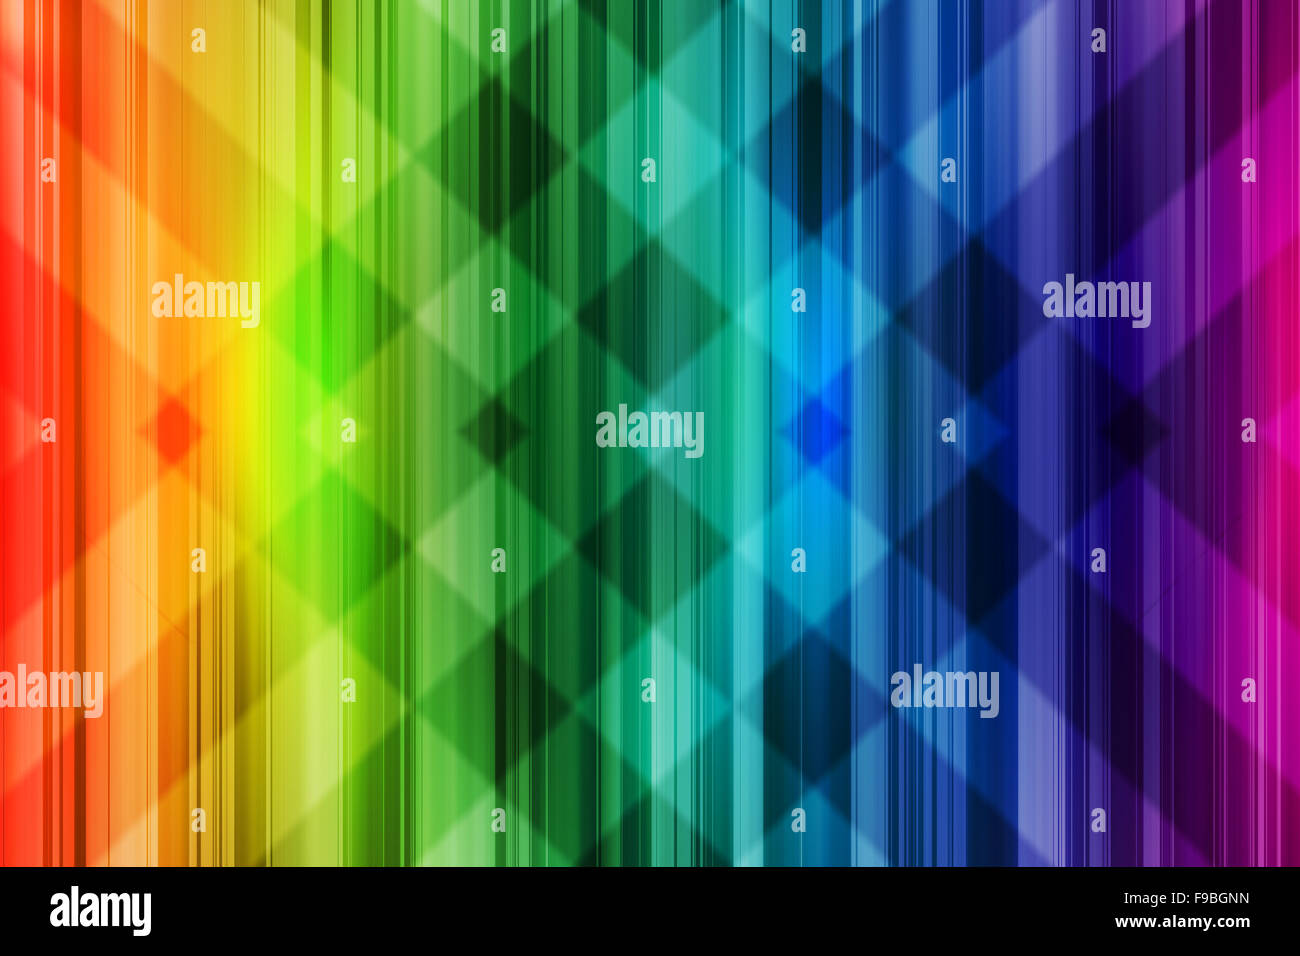 Rainbow background. Bright colorful design with intersect pattern light. Stock Photo